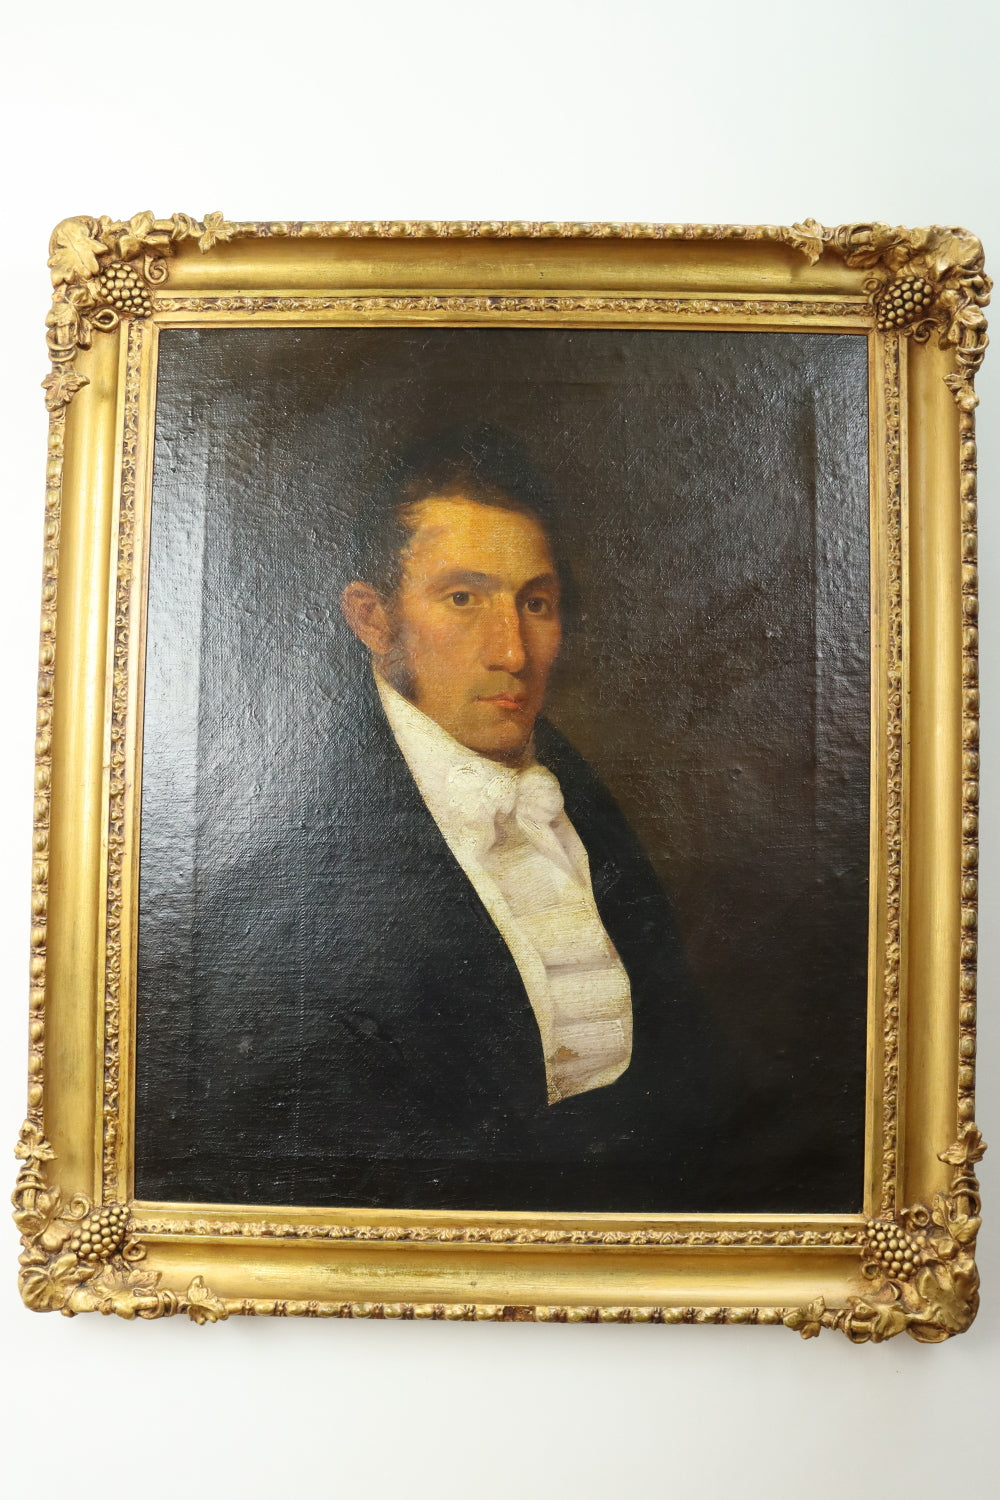  American School - Early 19th C Portrait of a Gentleman - Oil on Canvas Painting | Work of Man